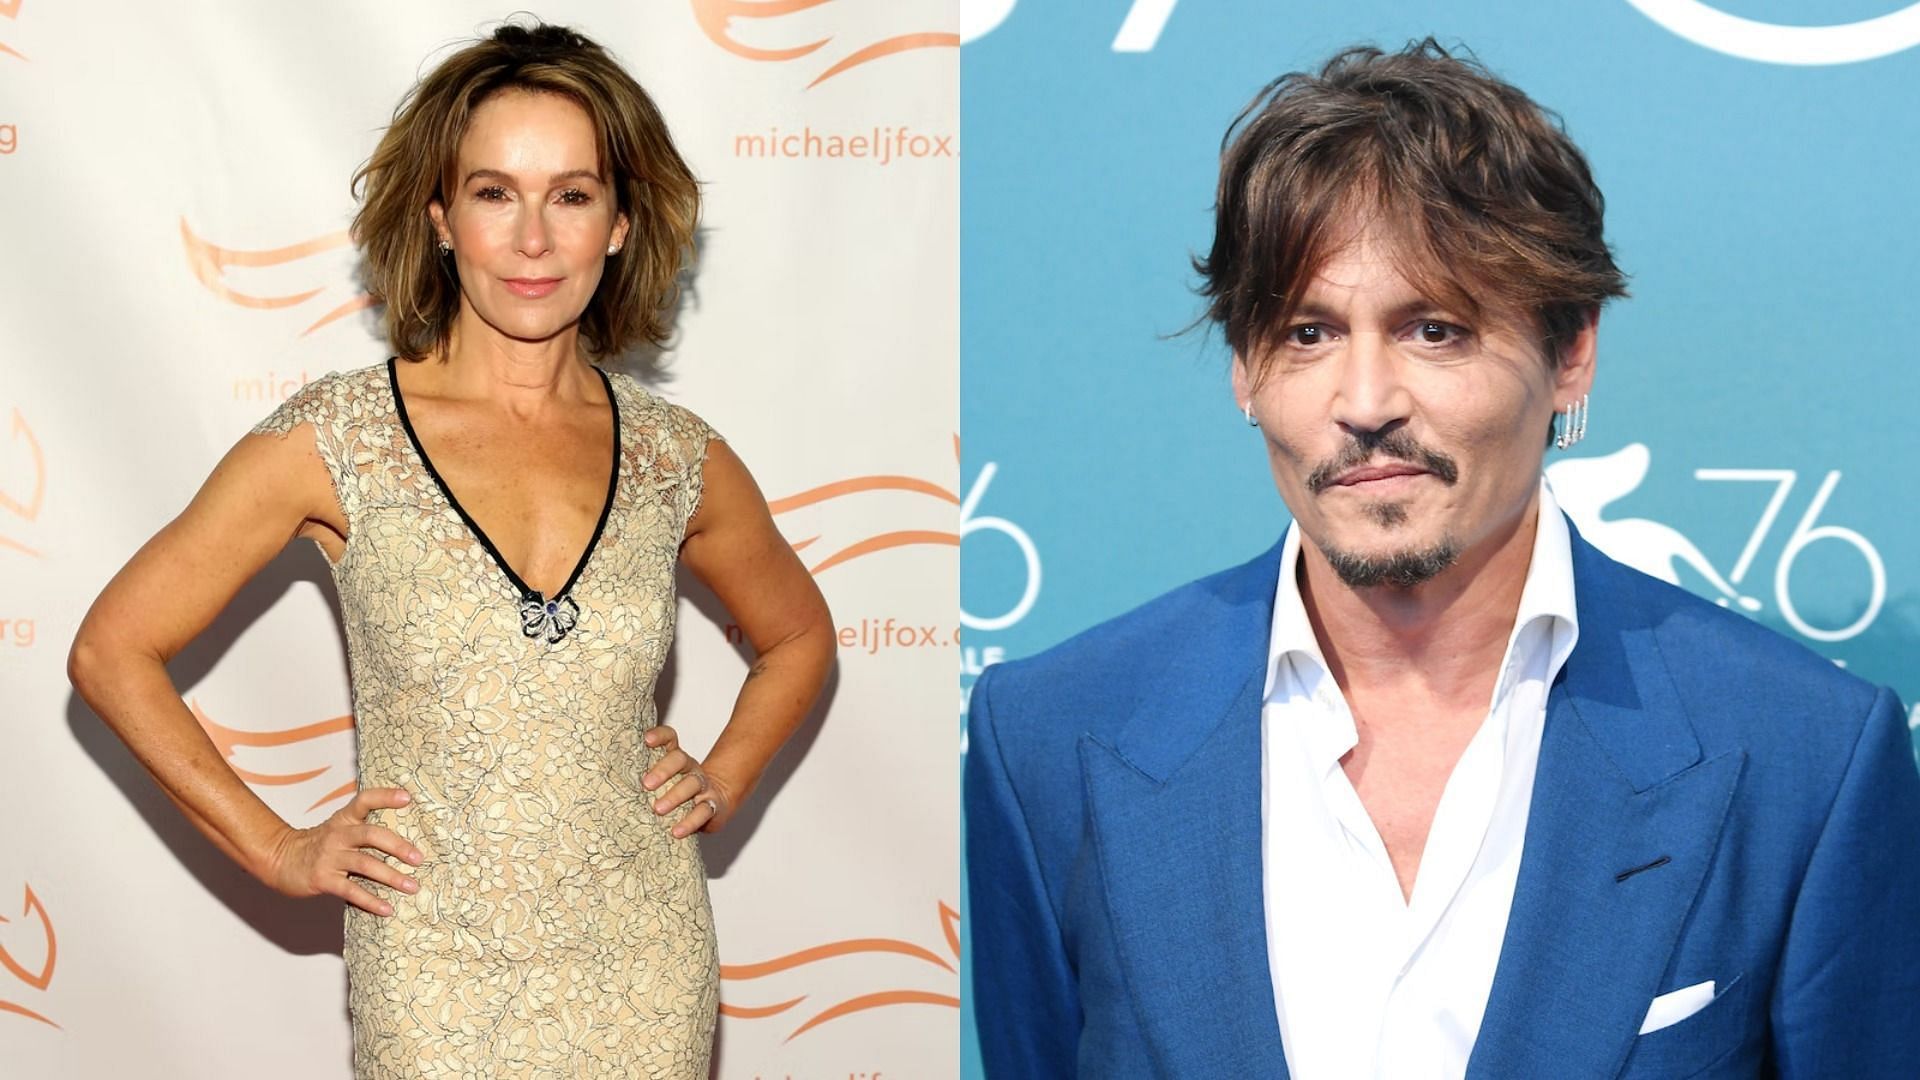 Jennifer Grey and Johnny Depp had a short-lived romance in the 1980s. (Image via Getty Images/Cindy Ord/Pascal Le Segretain)